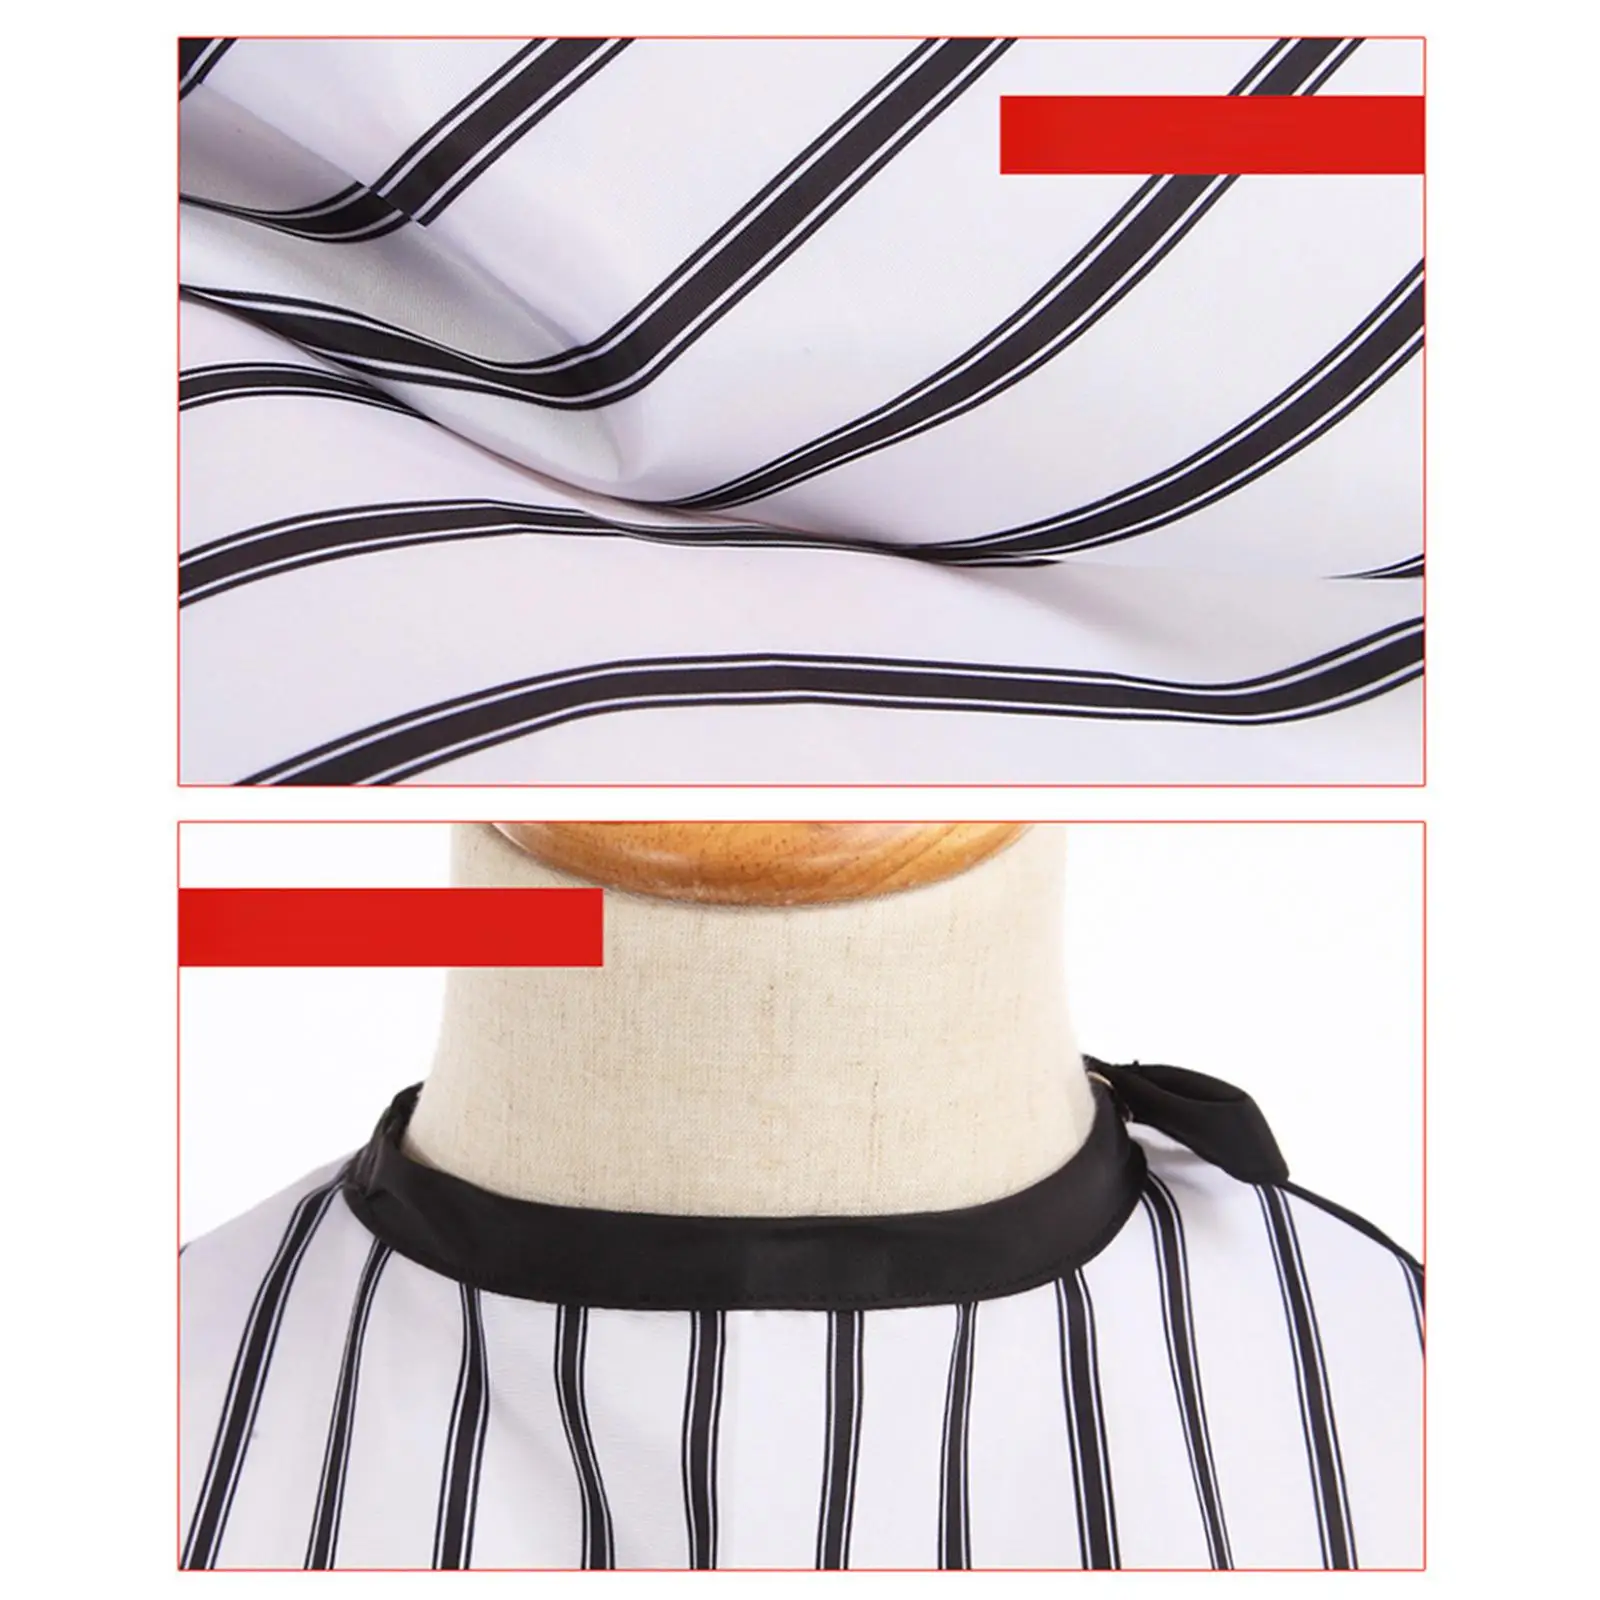 Hair Cutting Cape Stripe Waterproof Cloth Accessories for Hairdresser